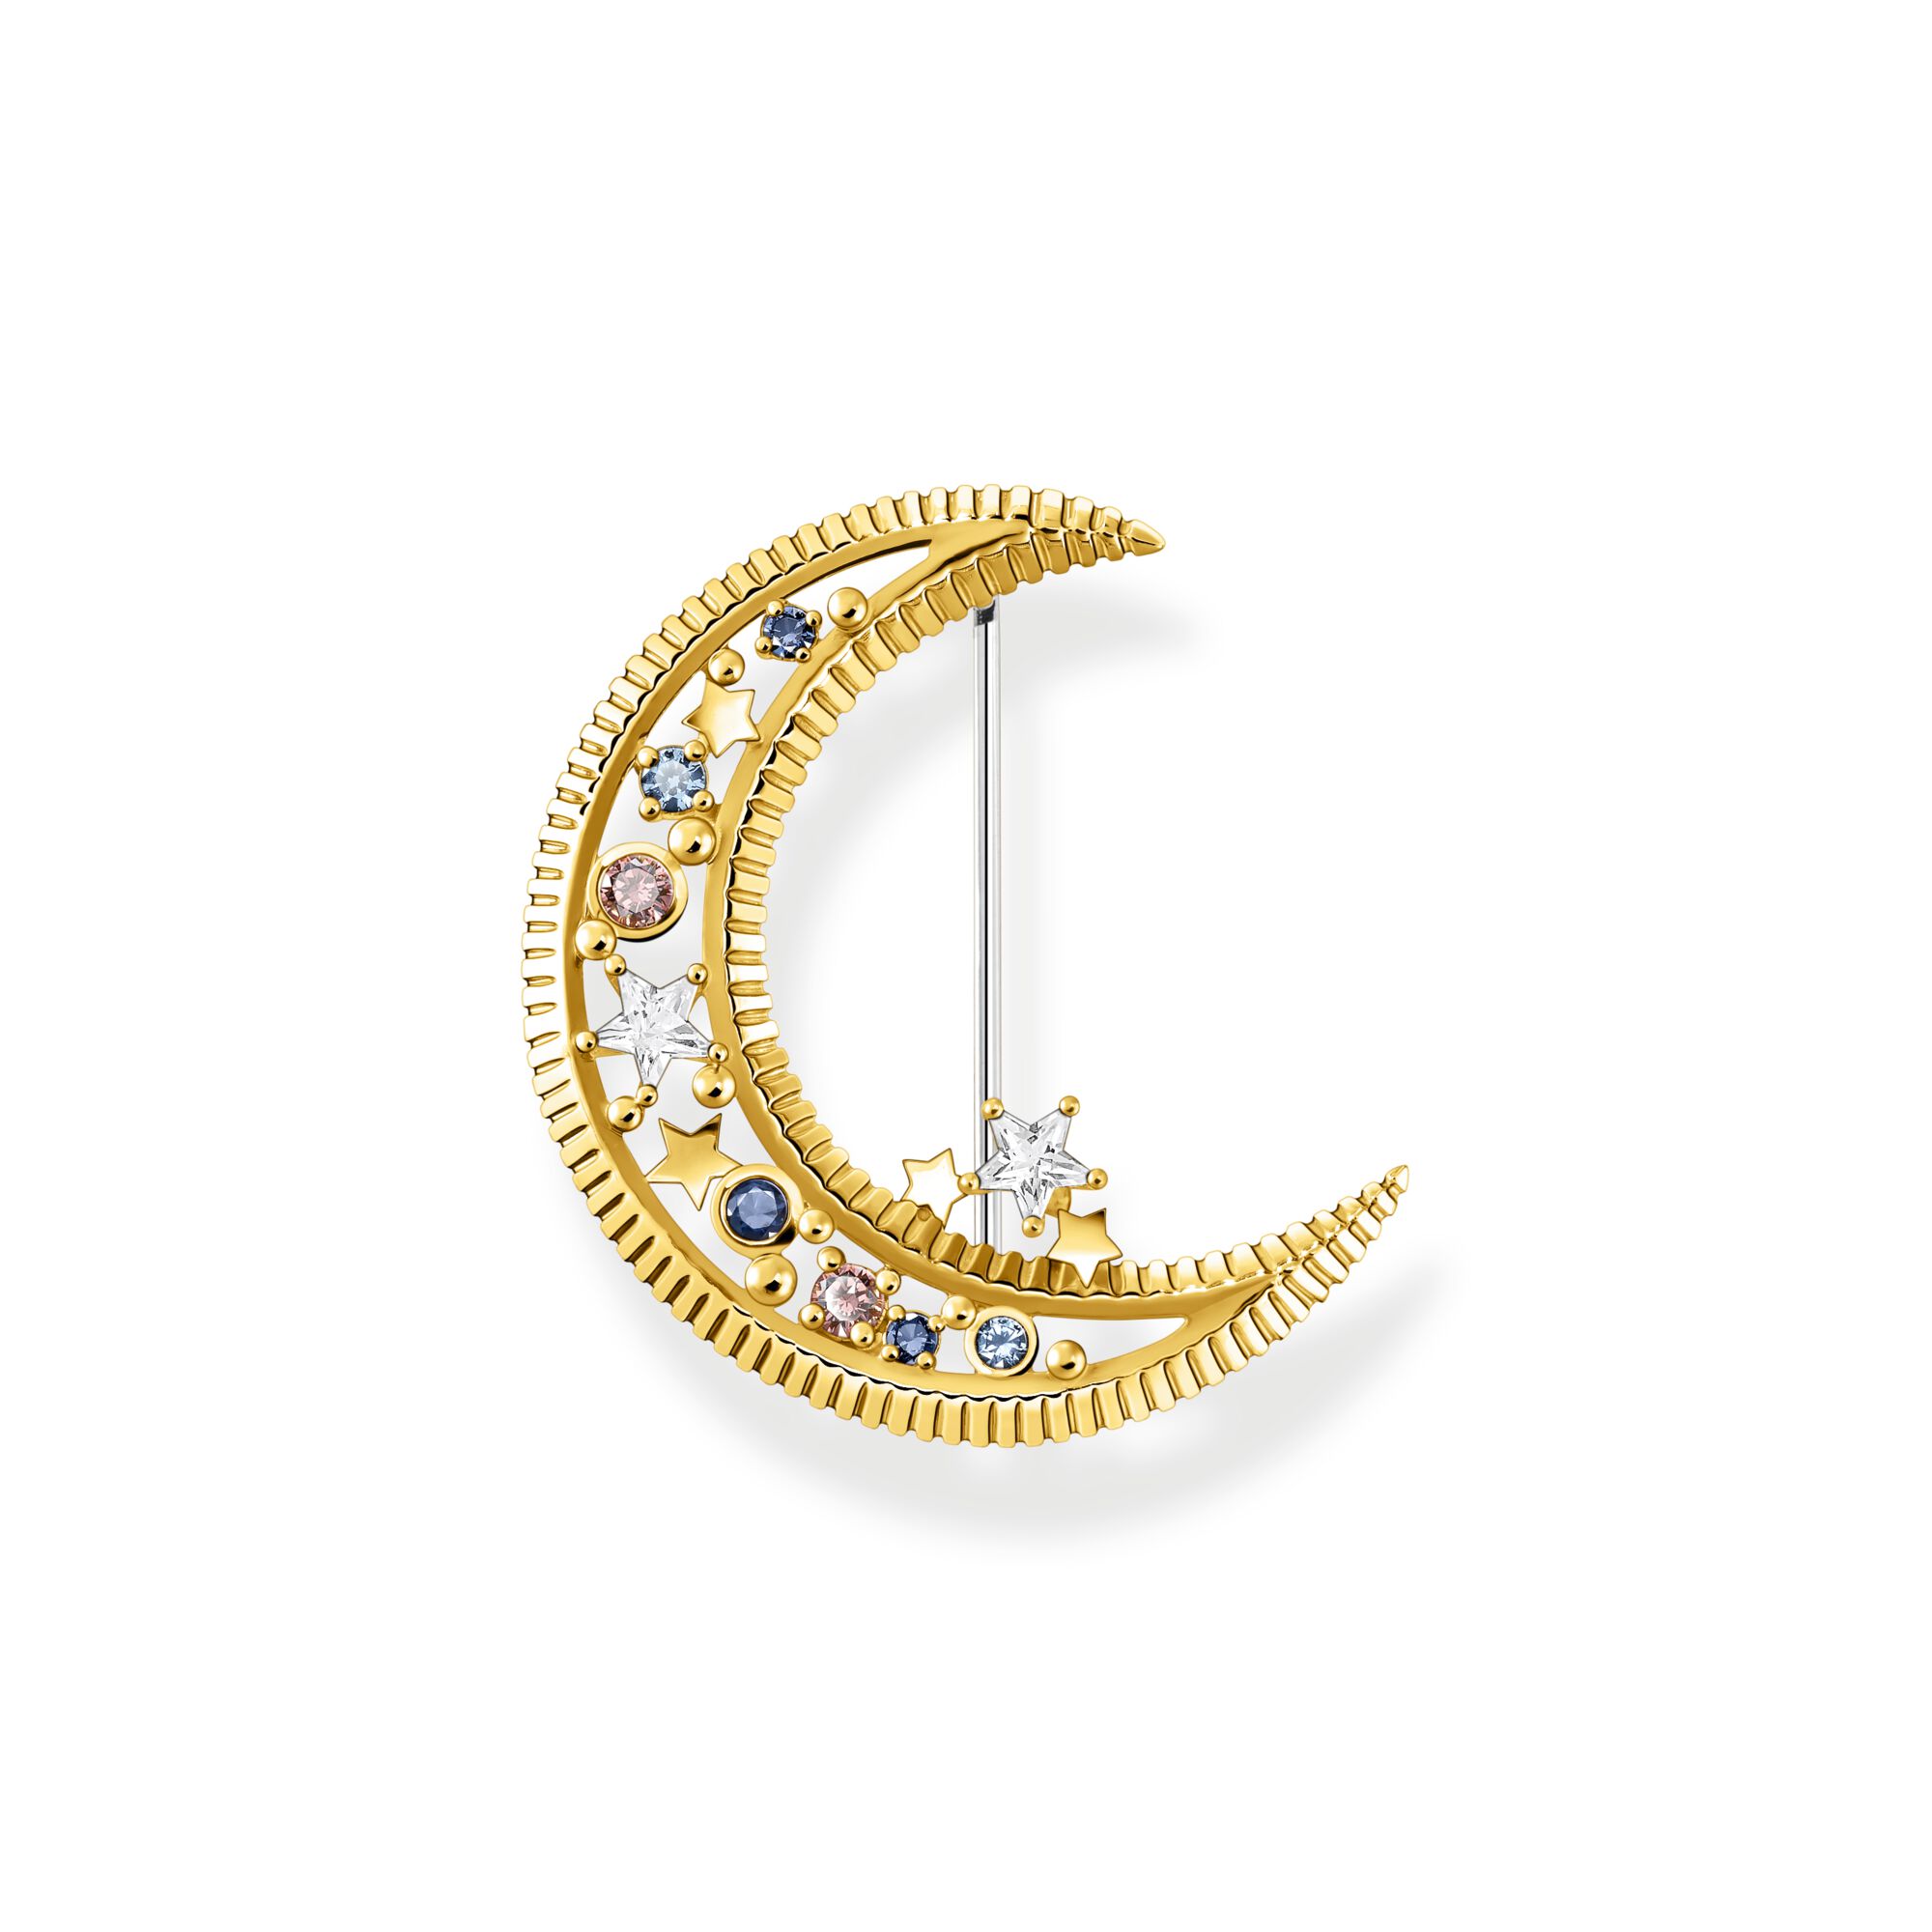 Thomas Sabo Gold Plated Sterling Silver Crescent Moon Colourful Stone Brooch D